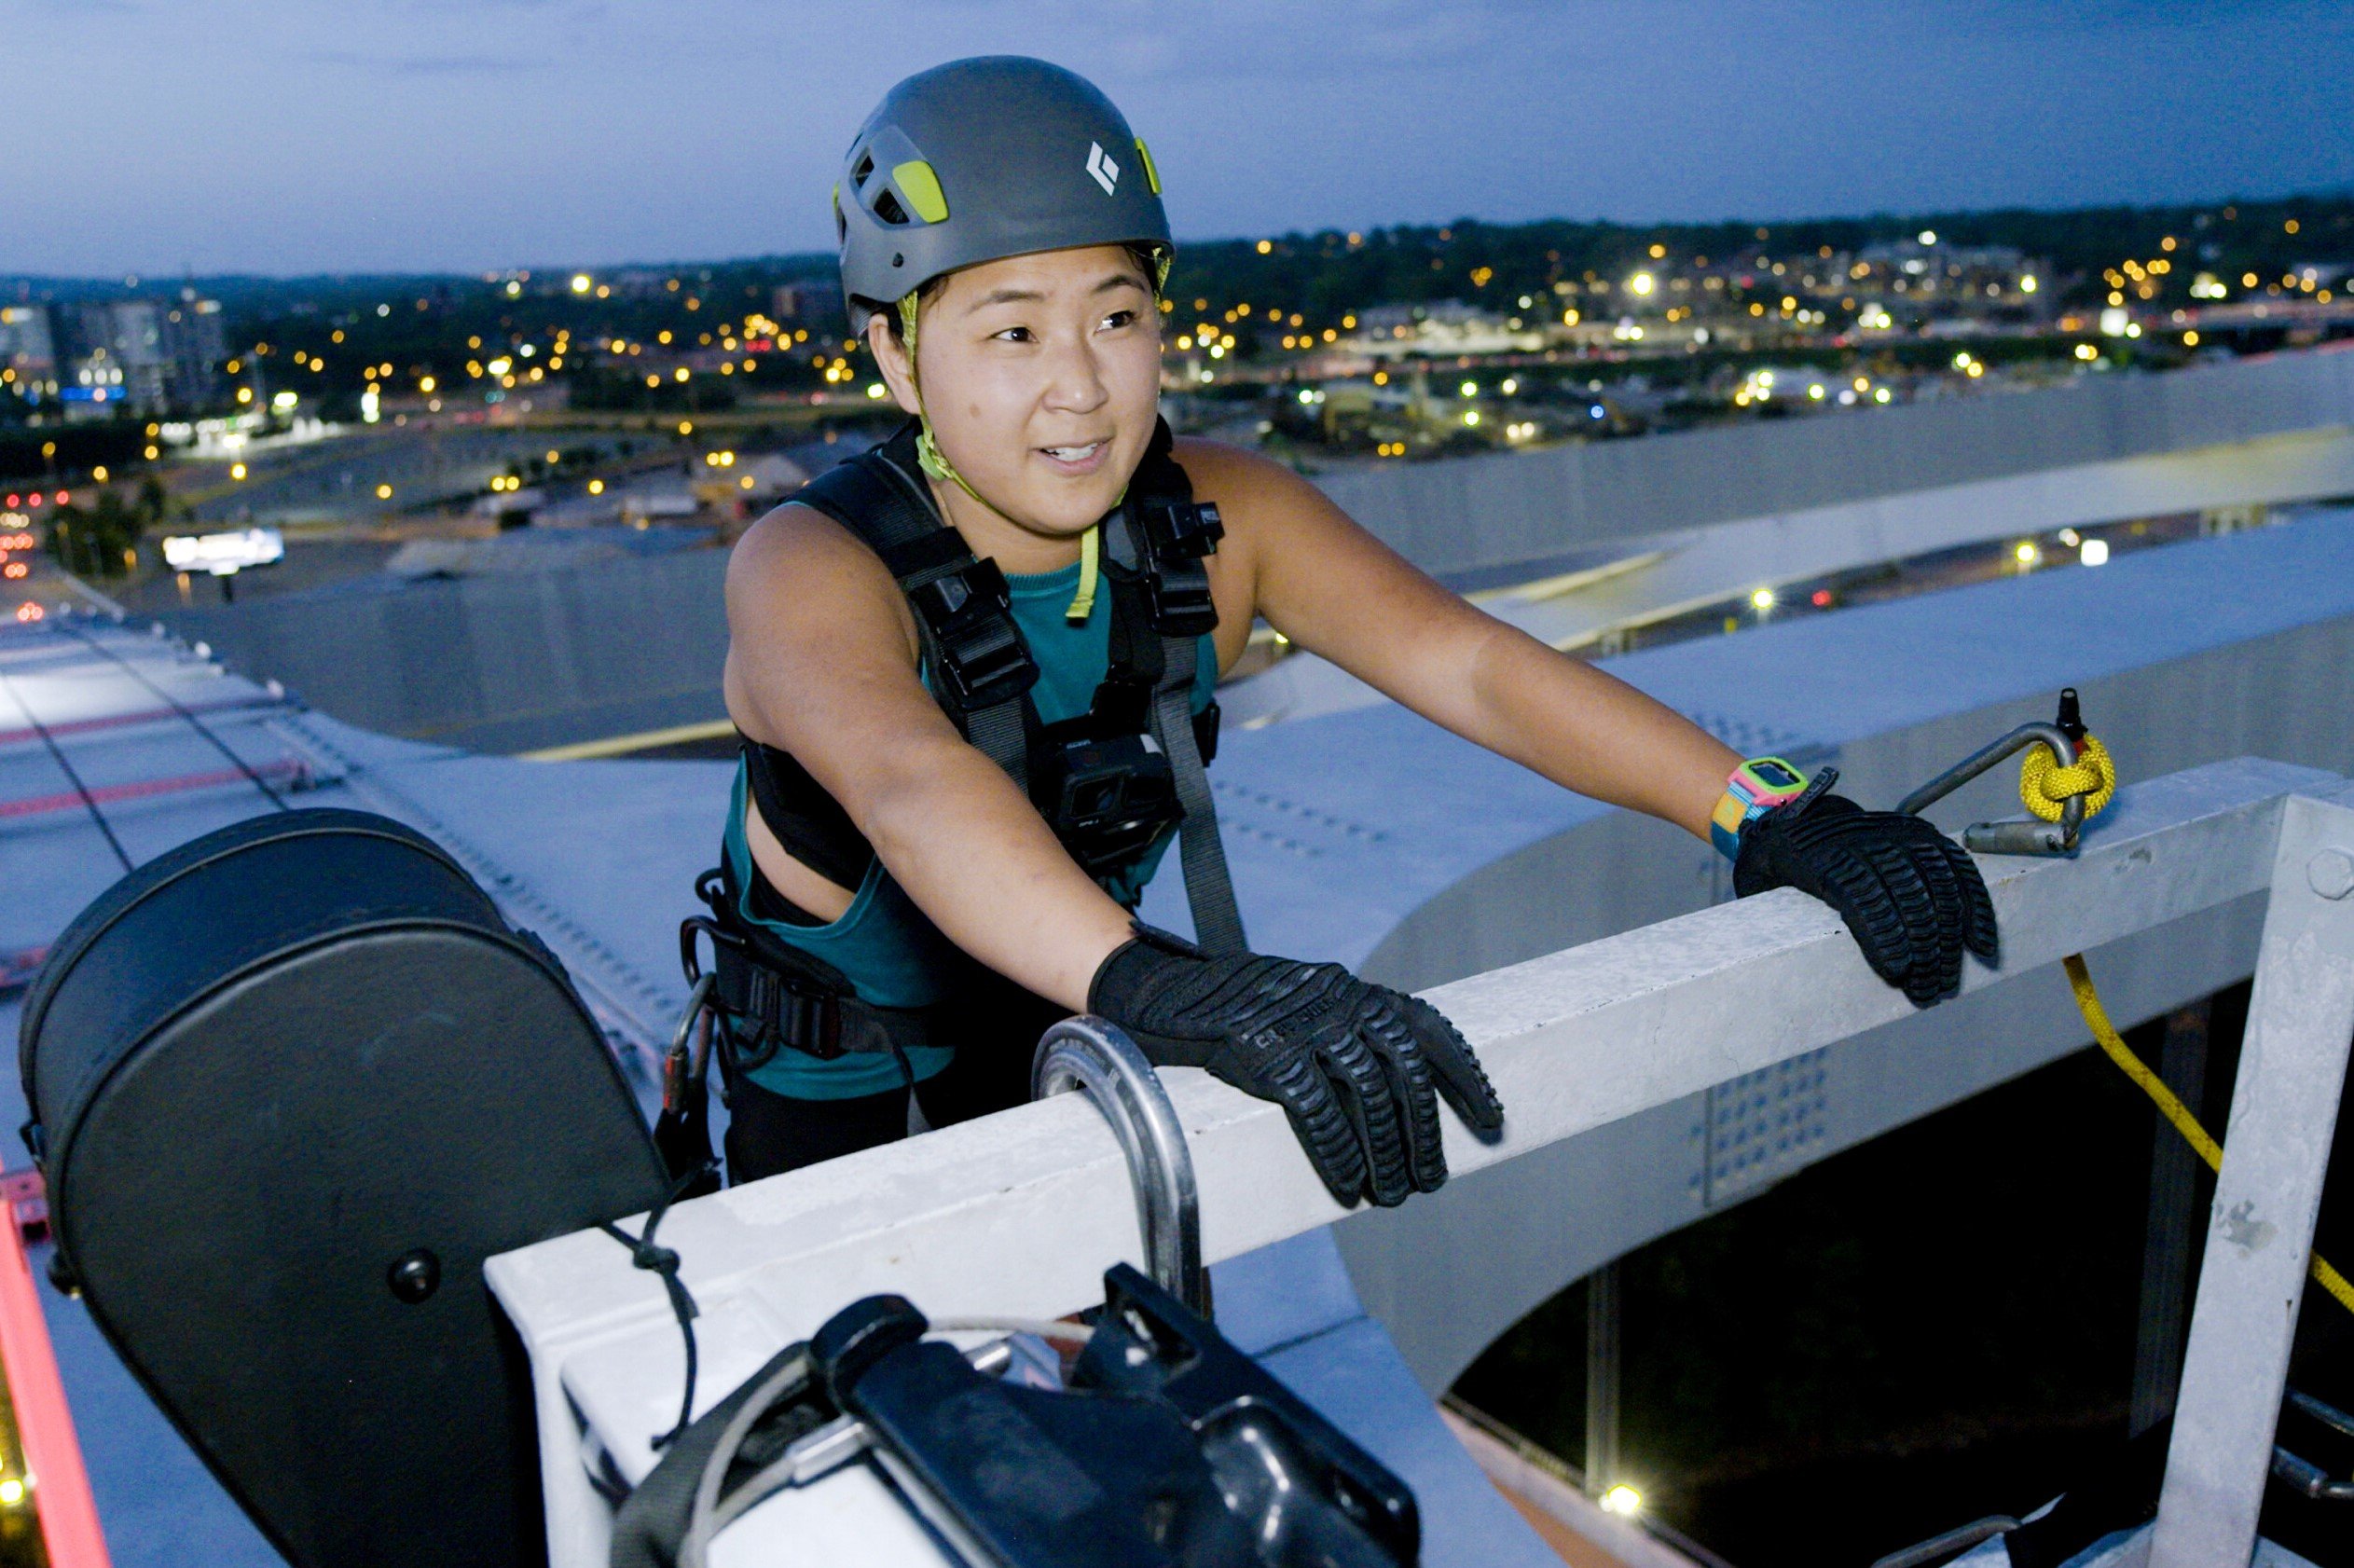 Emily Bushnell, who stars in the finale of 'The Amazing Race 34' tonight, Dec. 7, on CBS, wears a teal tank top, black pants, and climbing gear as she stands on top of a tall white structure.